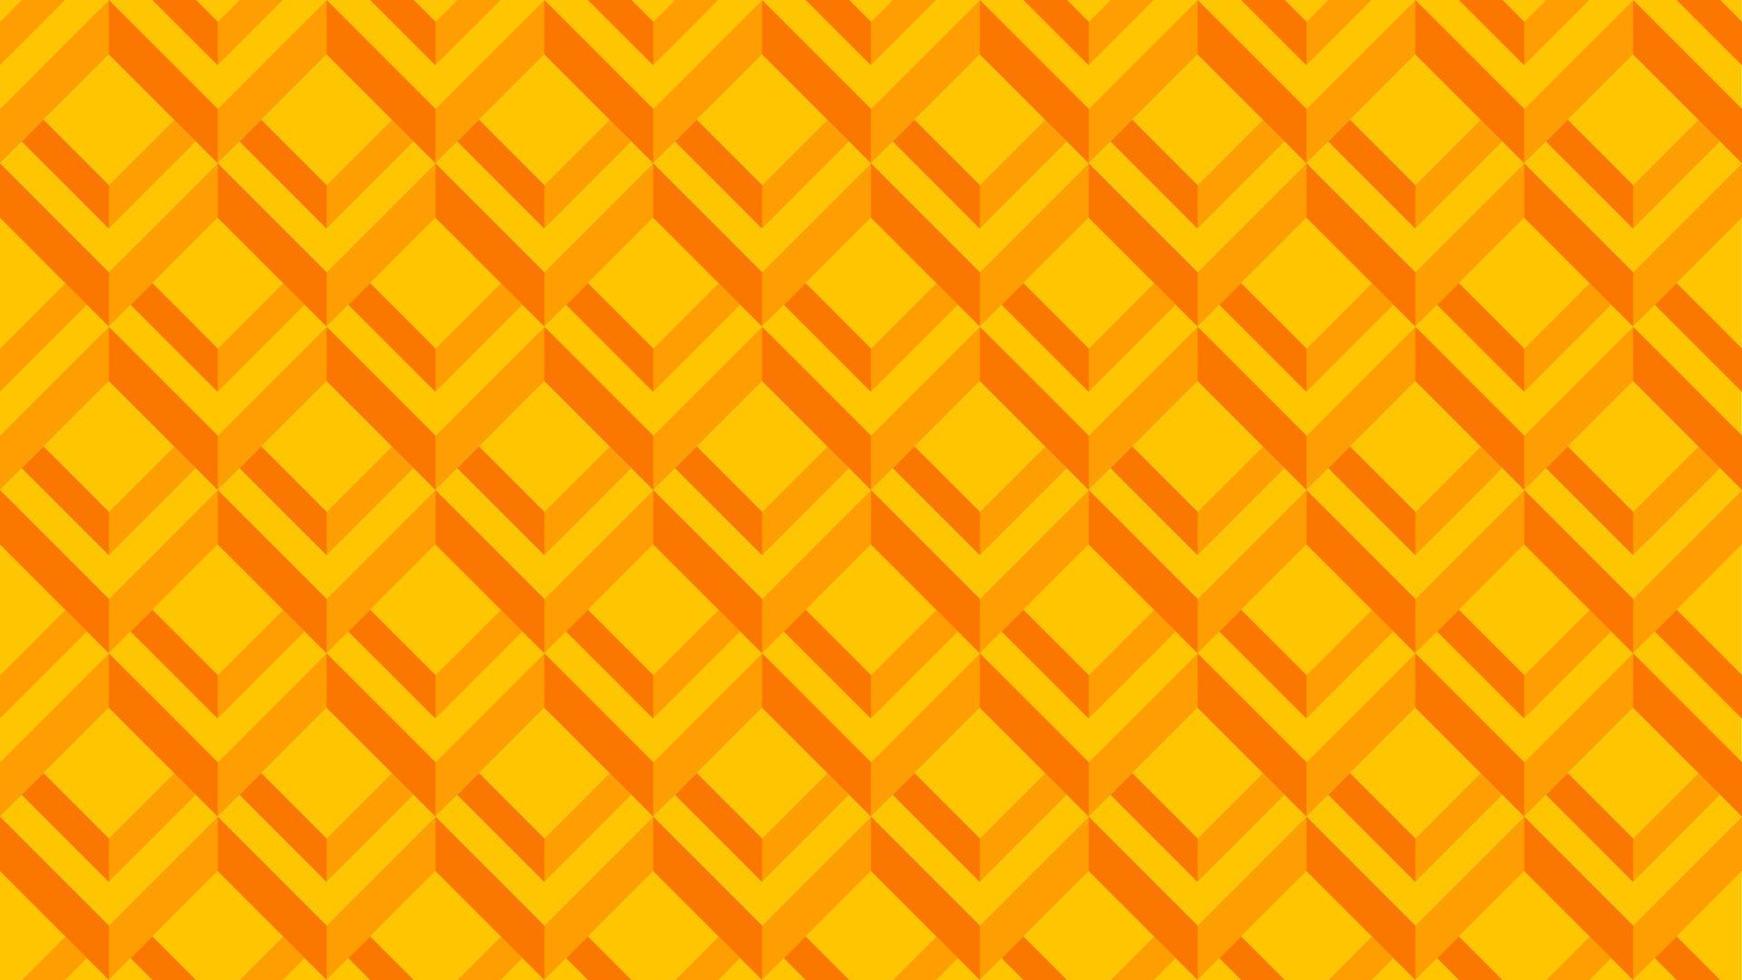 Pattern of 3d optical illusion. Pattern of illusion block. Vector illustration of 3d orange square. Geometric illusive for design graphic, background, wallpaper, layout or art